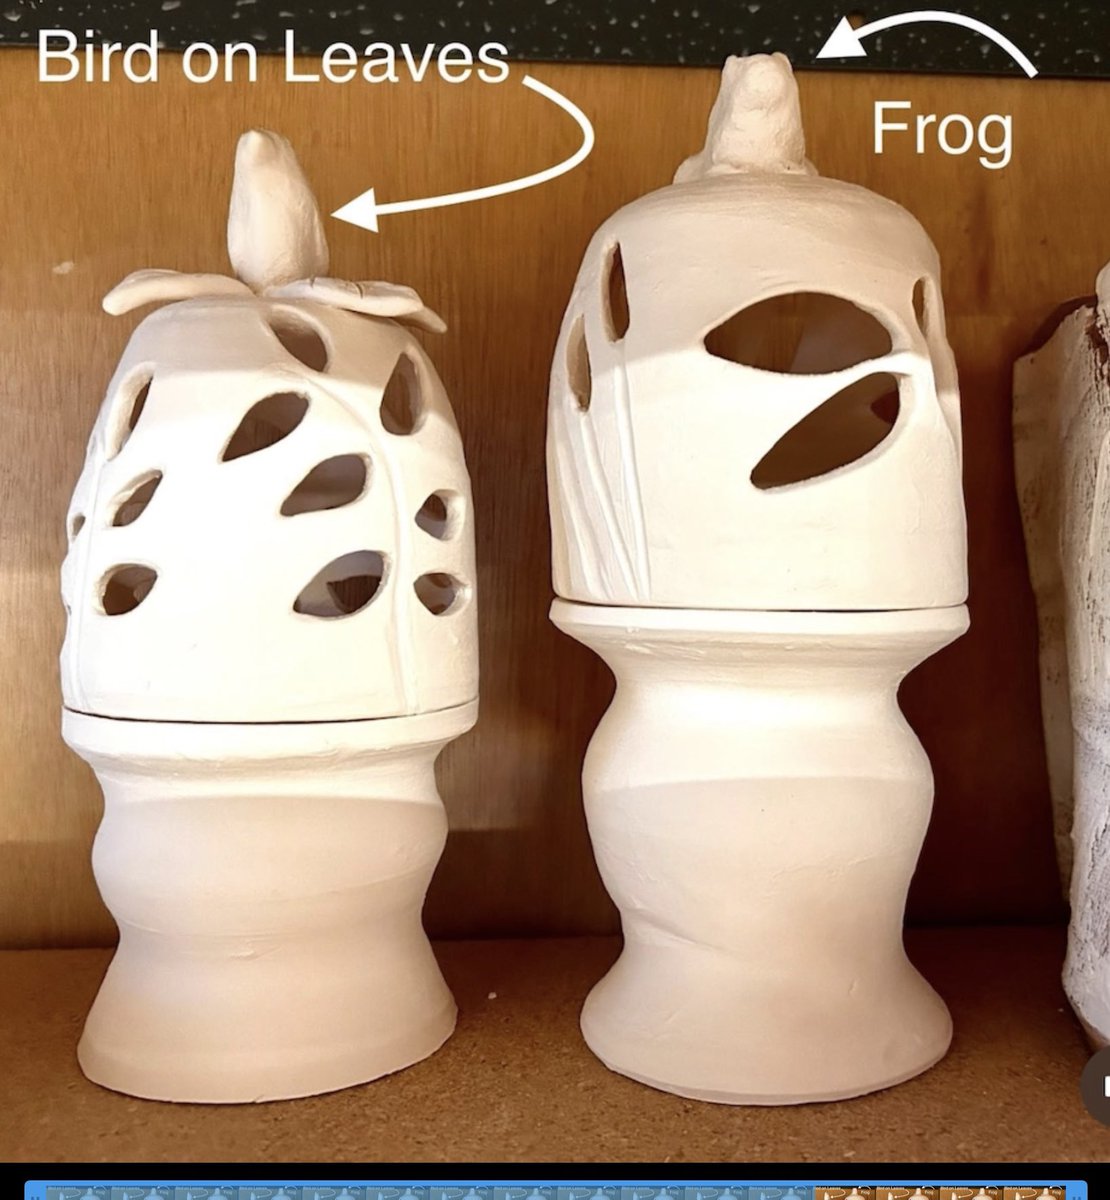 Here they both are finished.  Love how they turned out!  #luminarias  #tealightholders #birdcandleholder #froglovers #birdlovers #birdwatcher #froggift #birdgift #handmadepottery #zencatpottery #etsypotteryshop